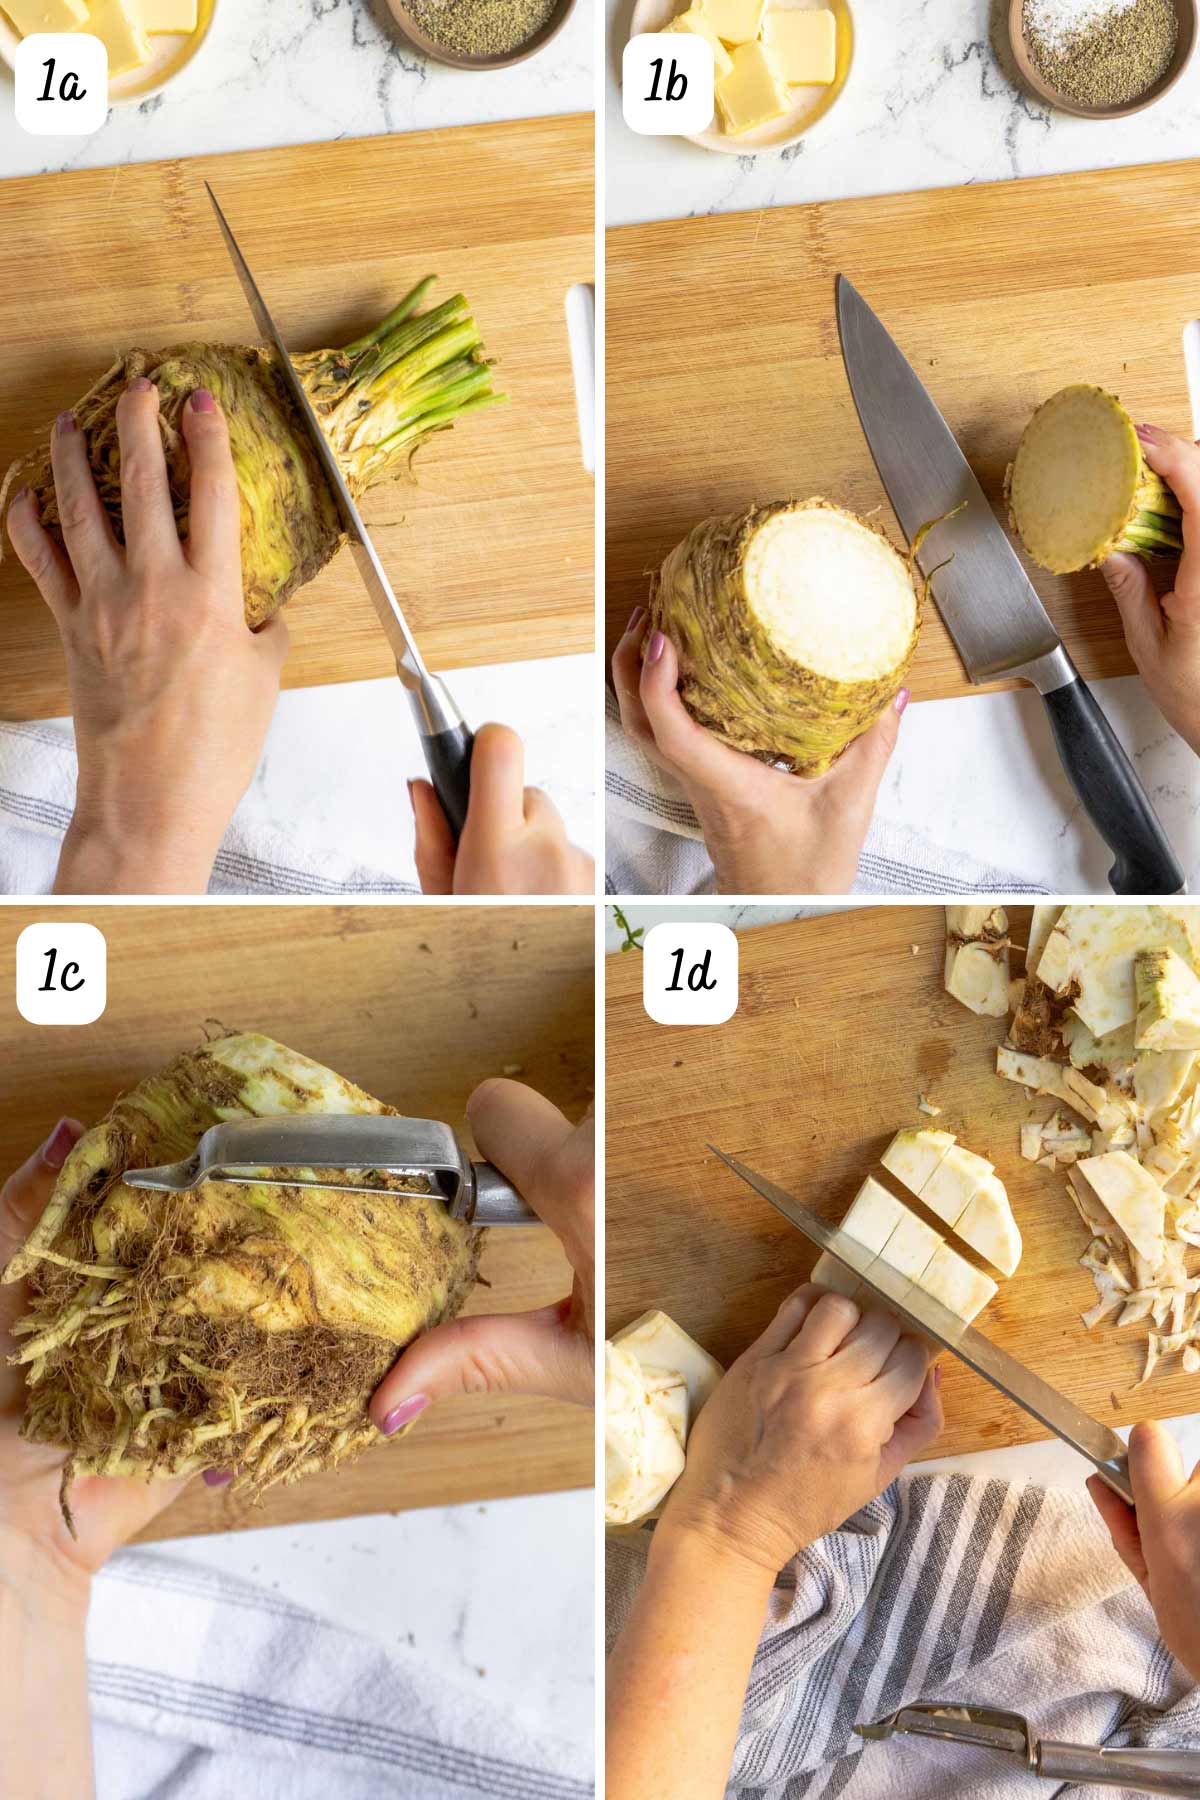 A person peeling and cutting celery root.